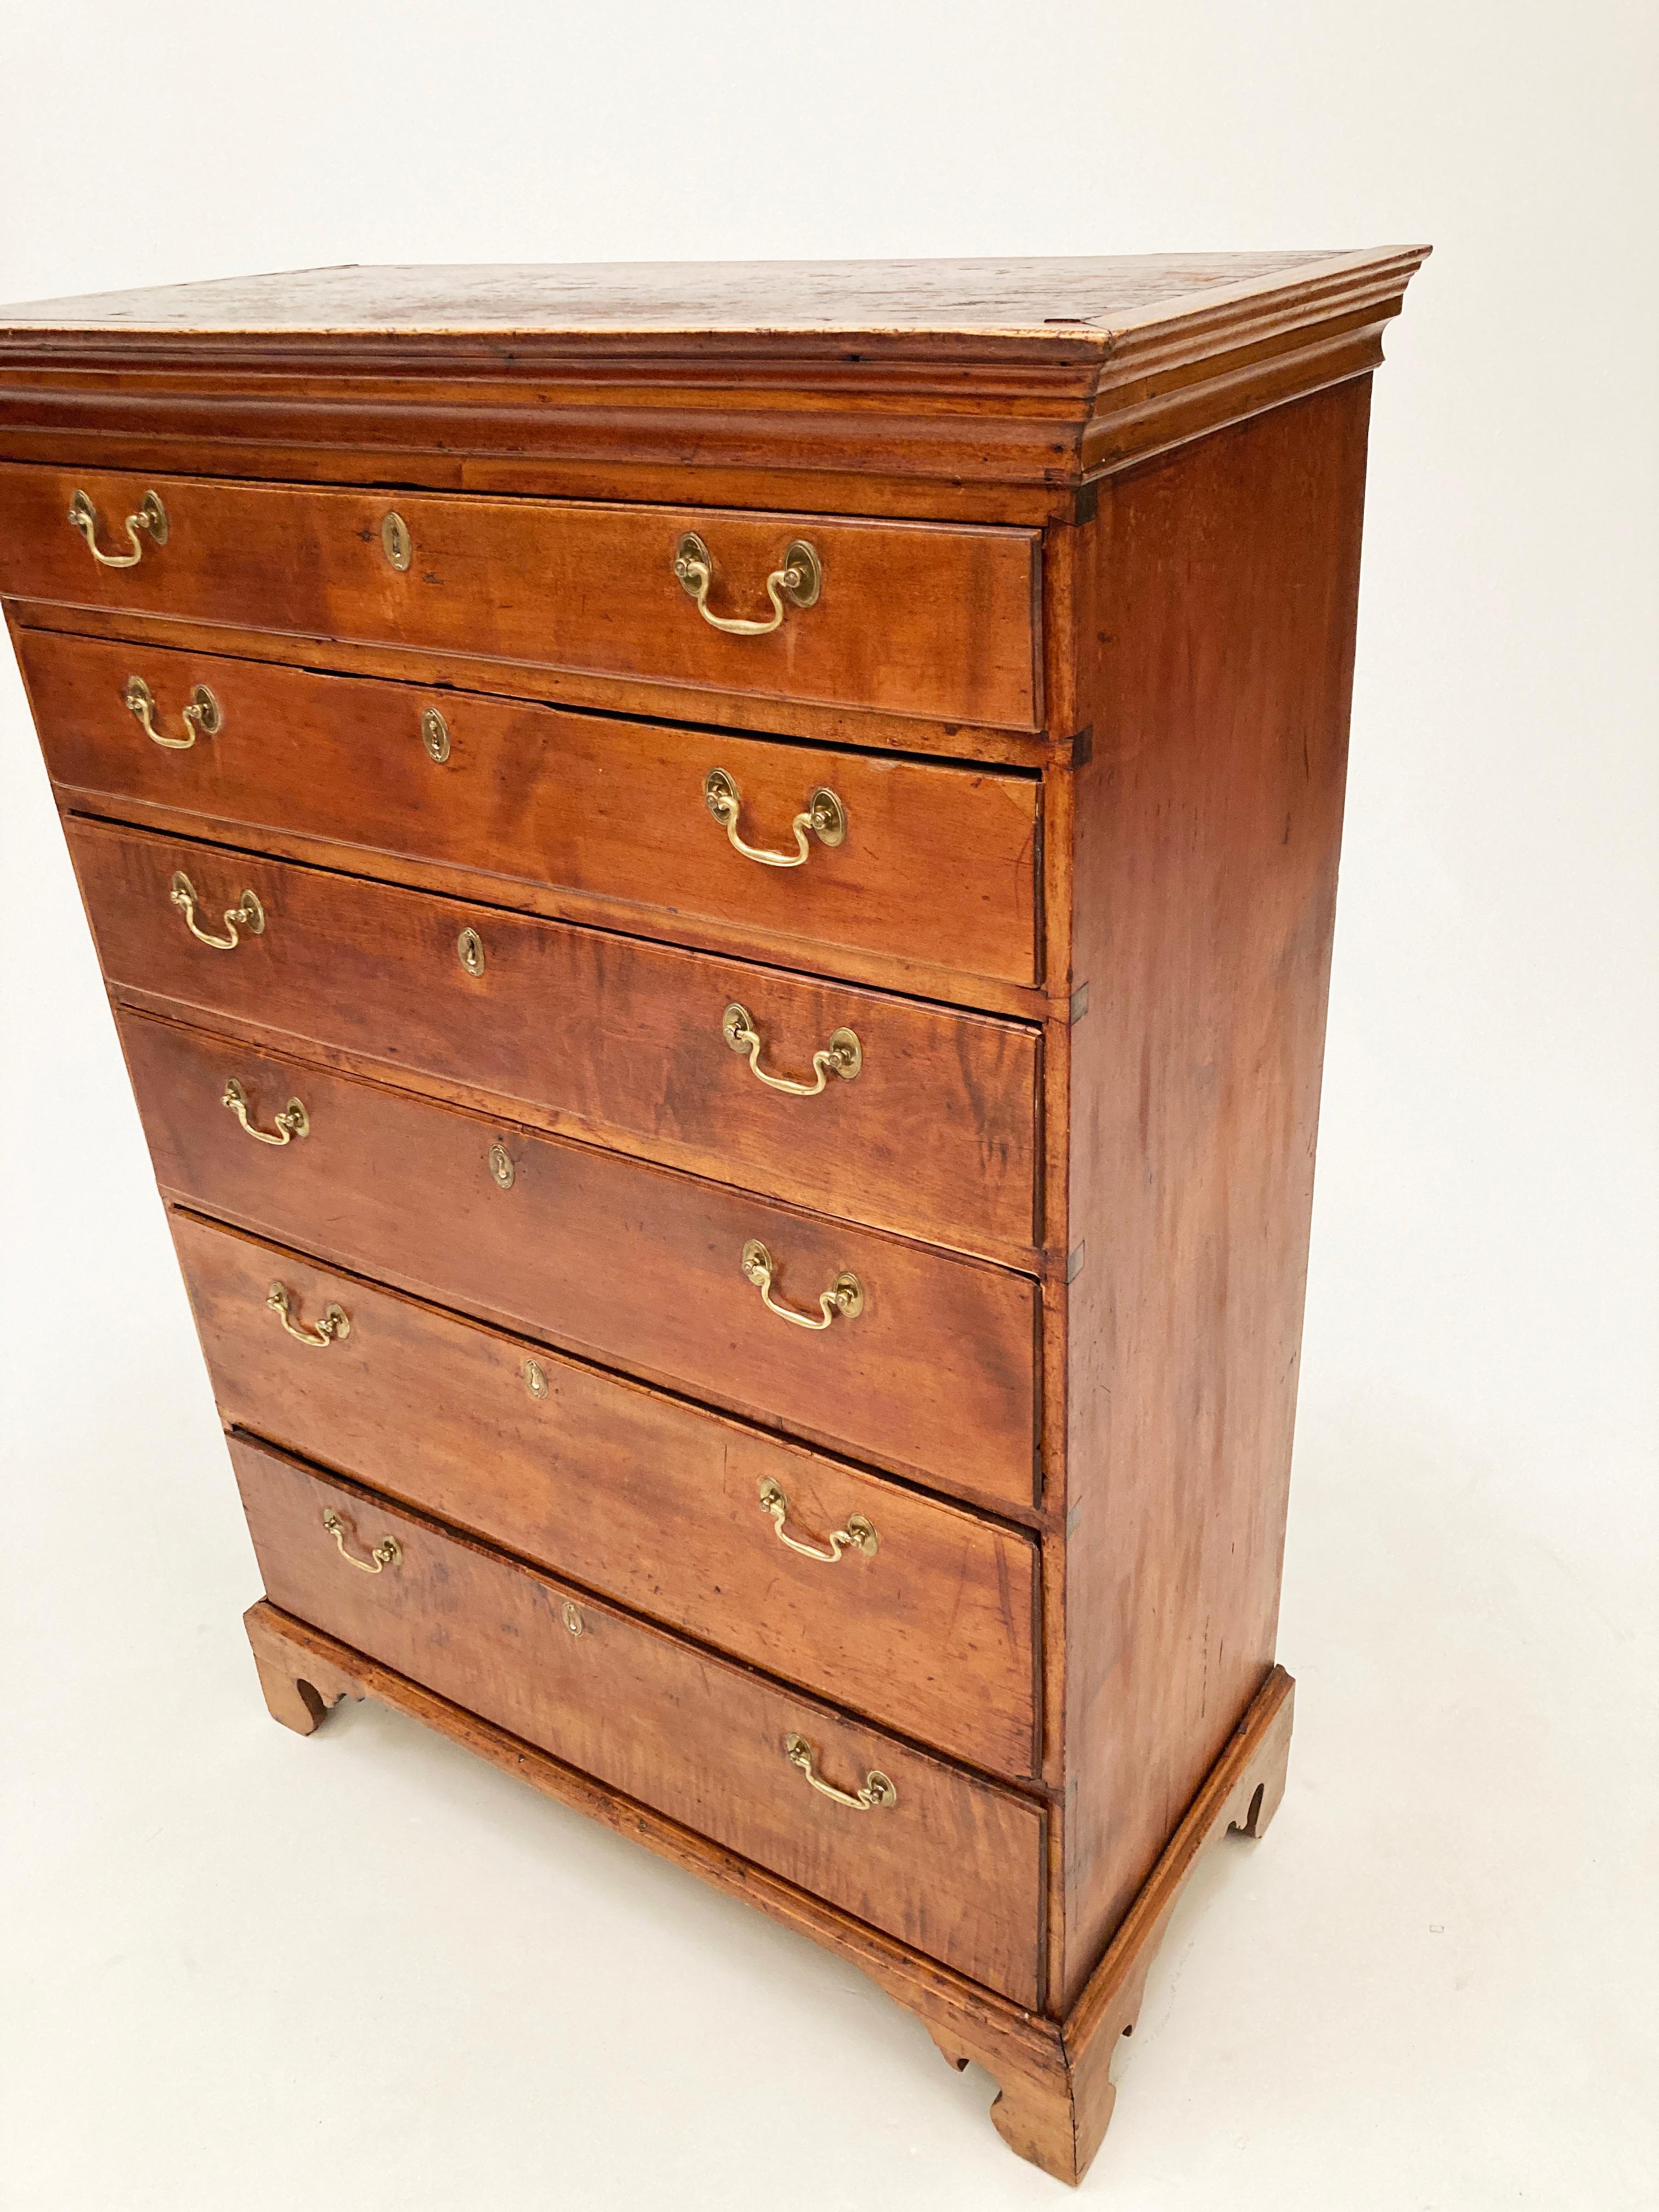 Stunning historic pieces like this don't come along every day! This c. 1780's Tiger Maple Chippendale tall dresser with 6 drawers with brass drawer pulls was designed and built in the New England area around 1780. It's birthplace was most likely New